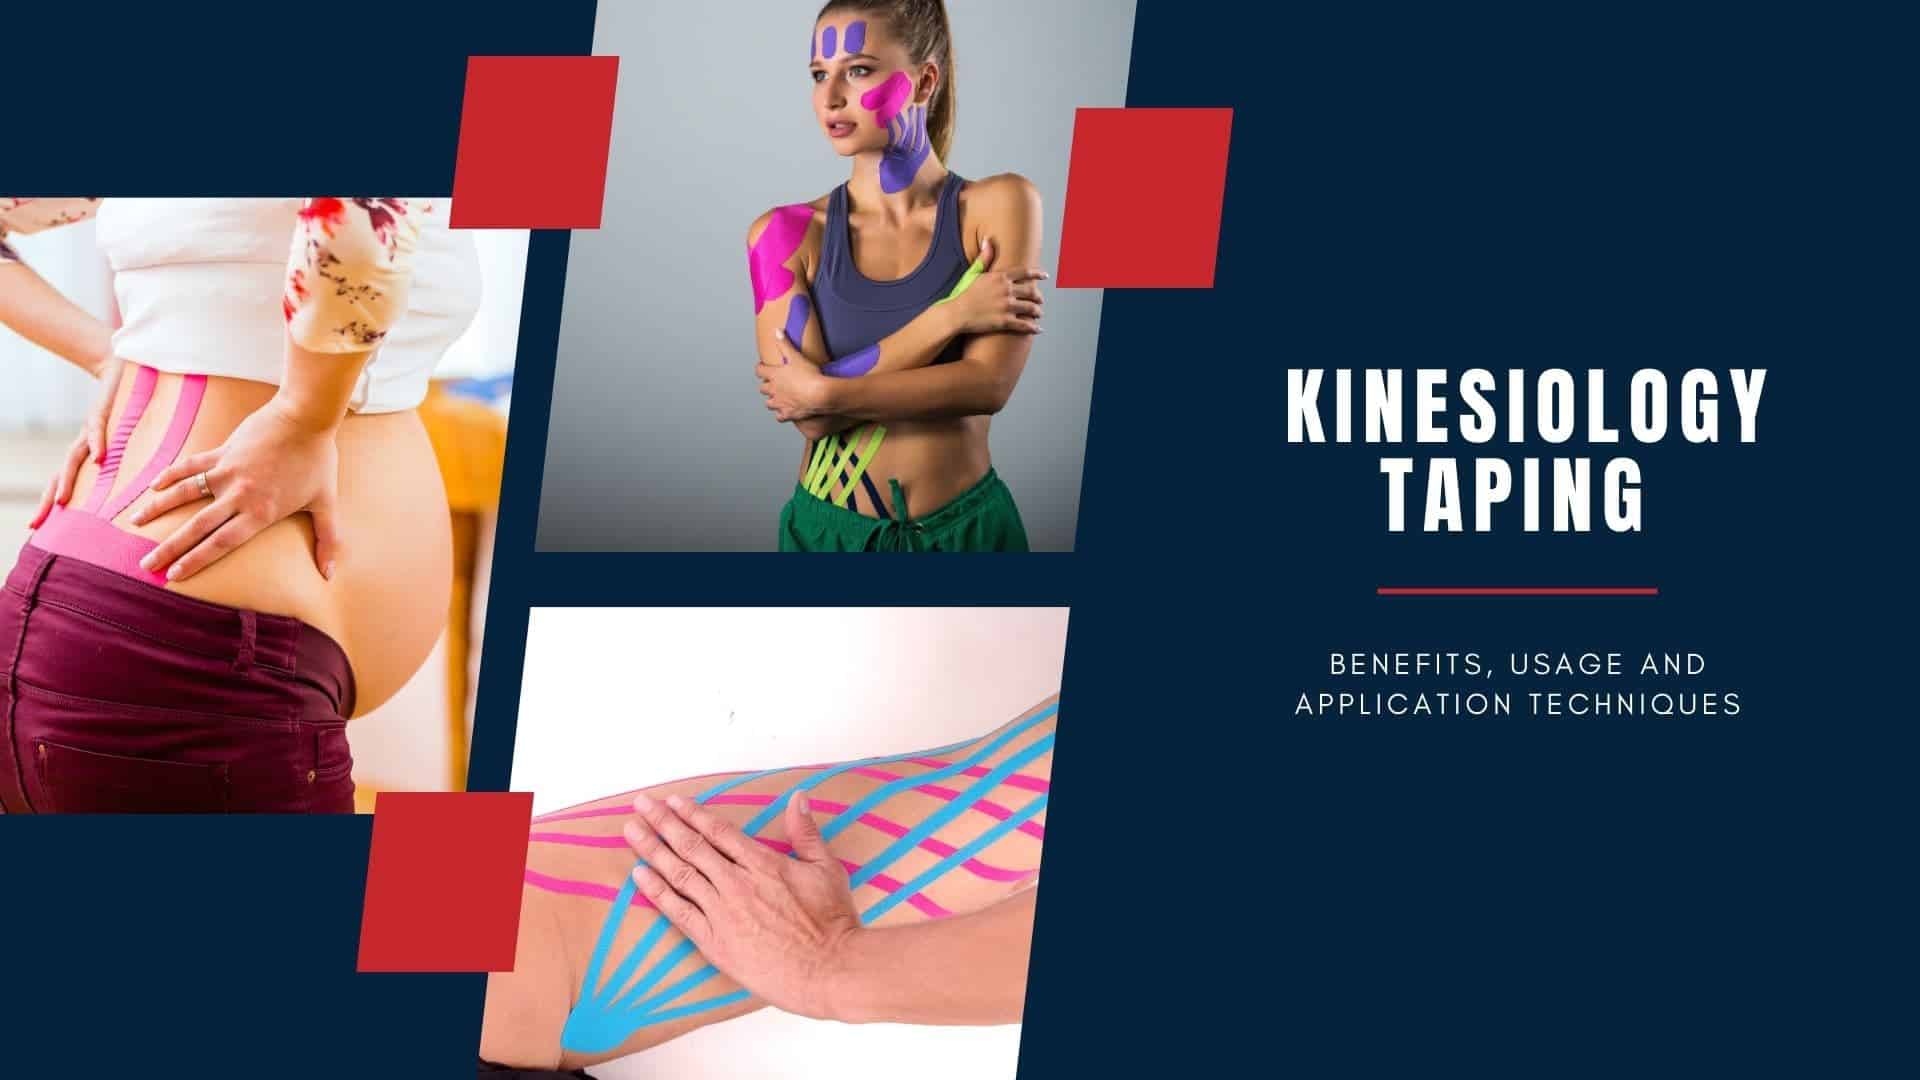 Kinesiology Taping Benefits, Usage and Application Techniques